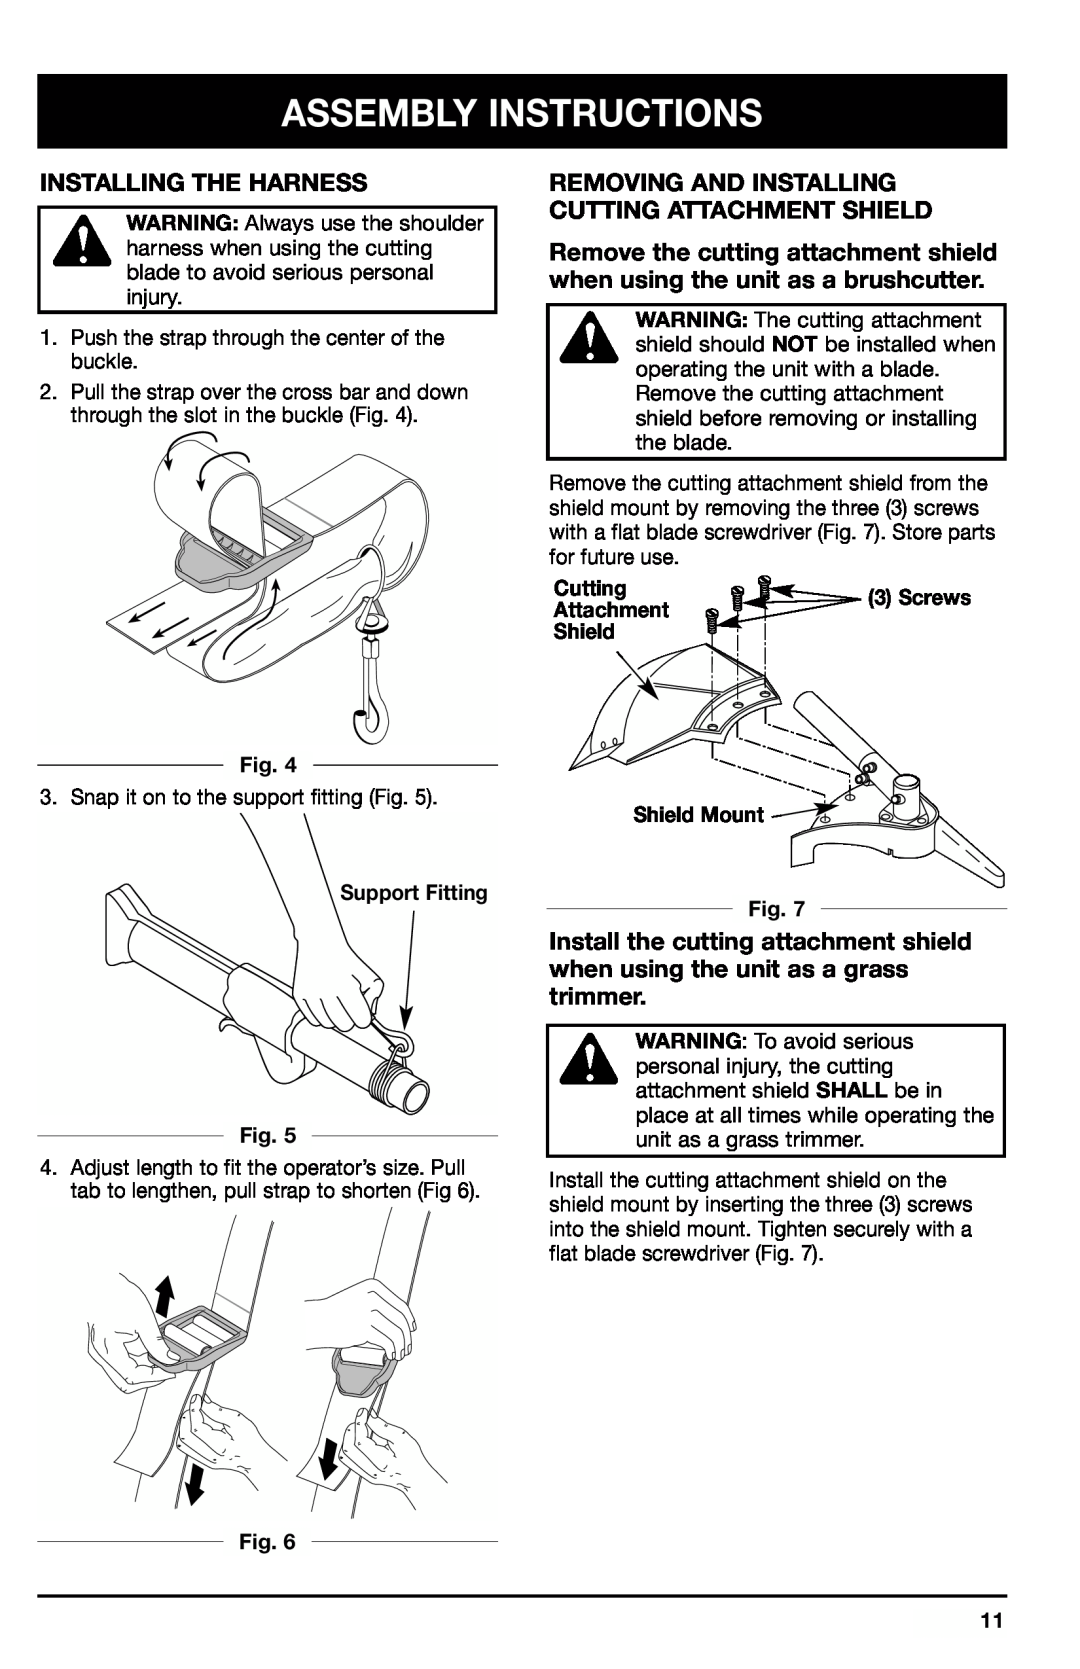 Ryobi 780r Installing The Harness, Removing And Installing Cutting Attachment Shield, Shield Mount, Assembly Instructions 